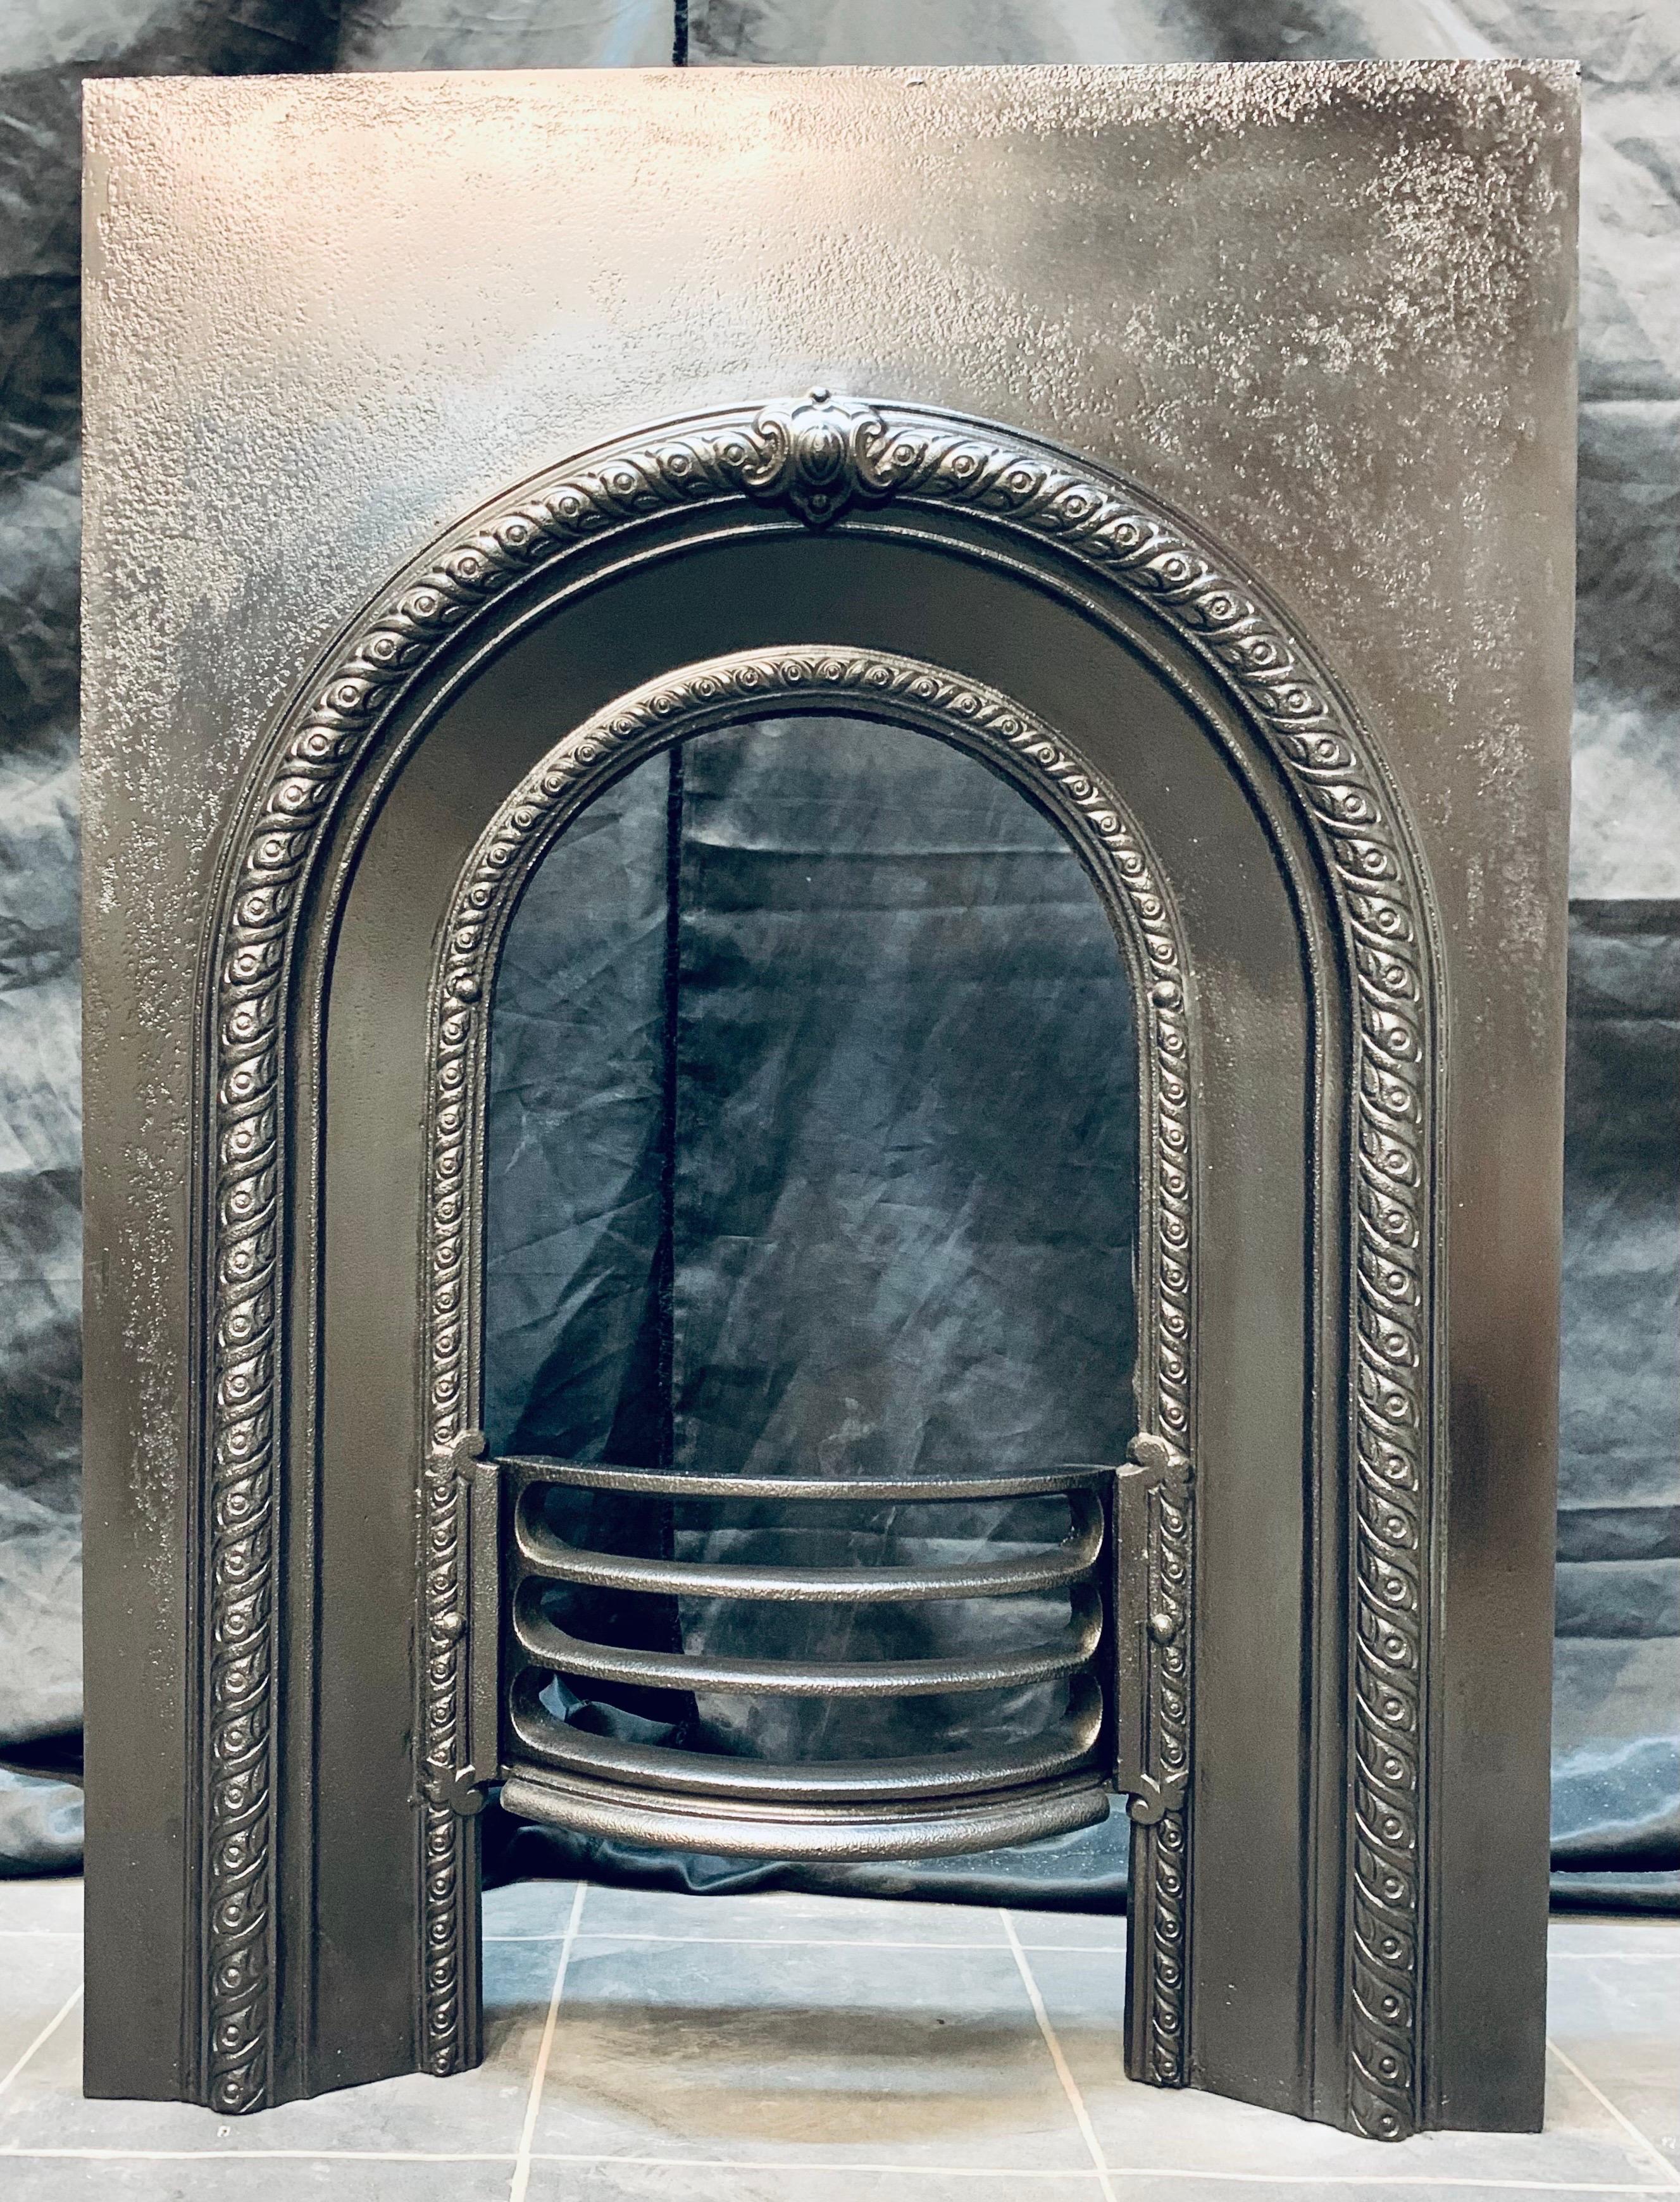 A small Scottish 19th Century Victorian cast iron fireplace insert, with a raised border and centralised cartouche, complete with its original curved fire bars. 

Scotland 1880c